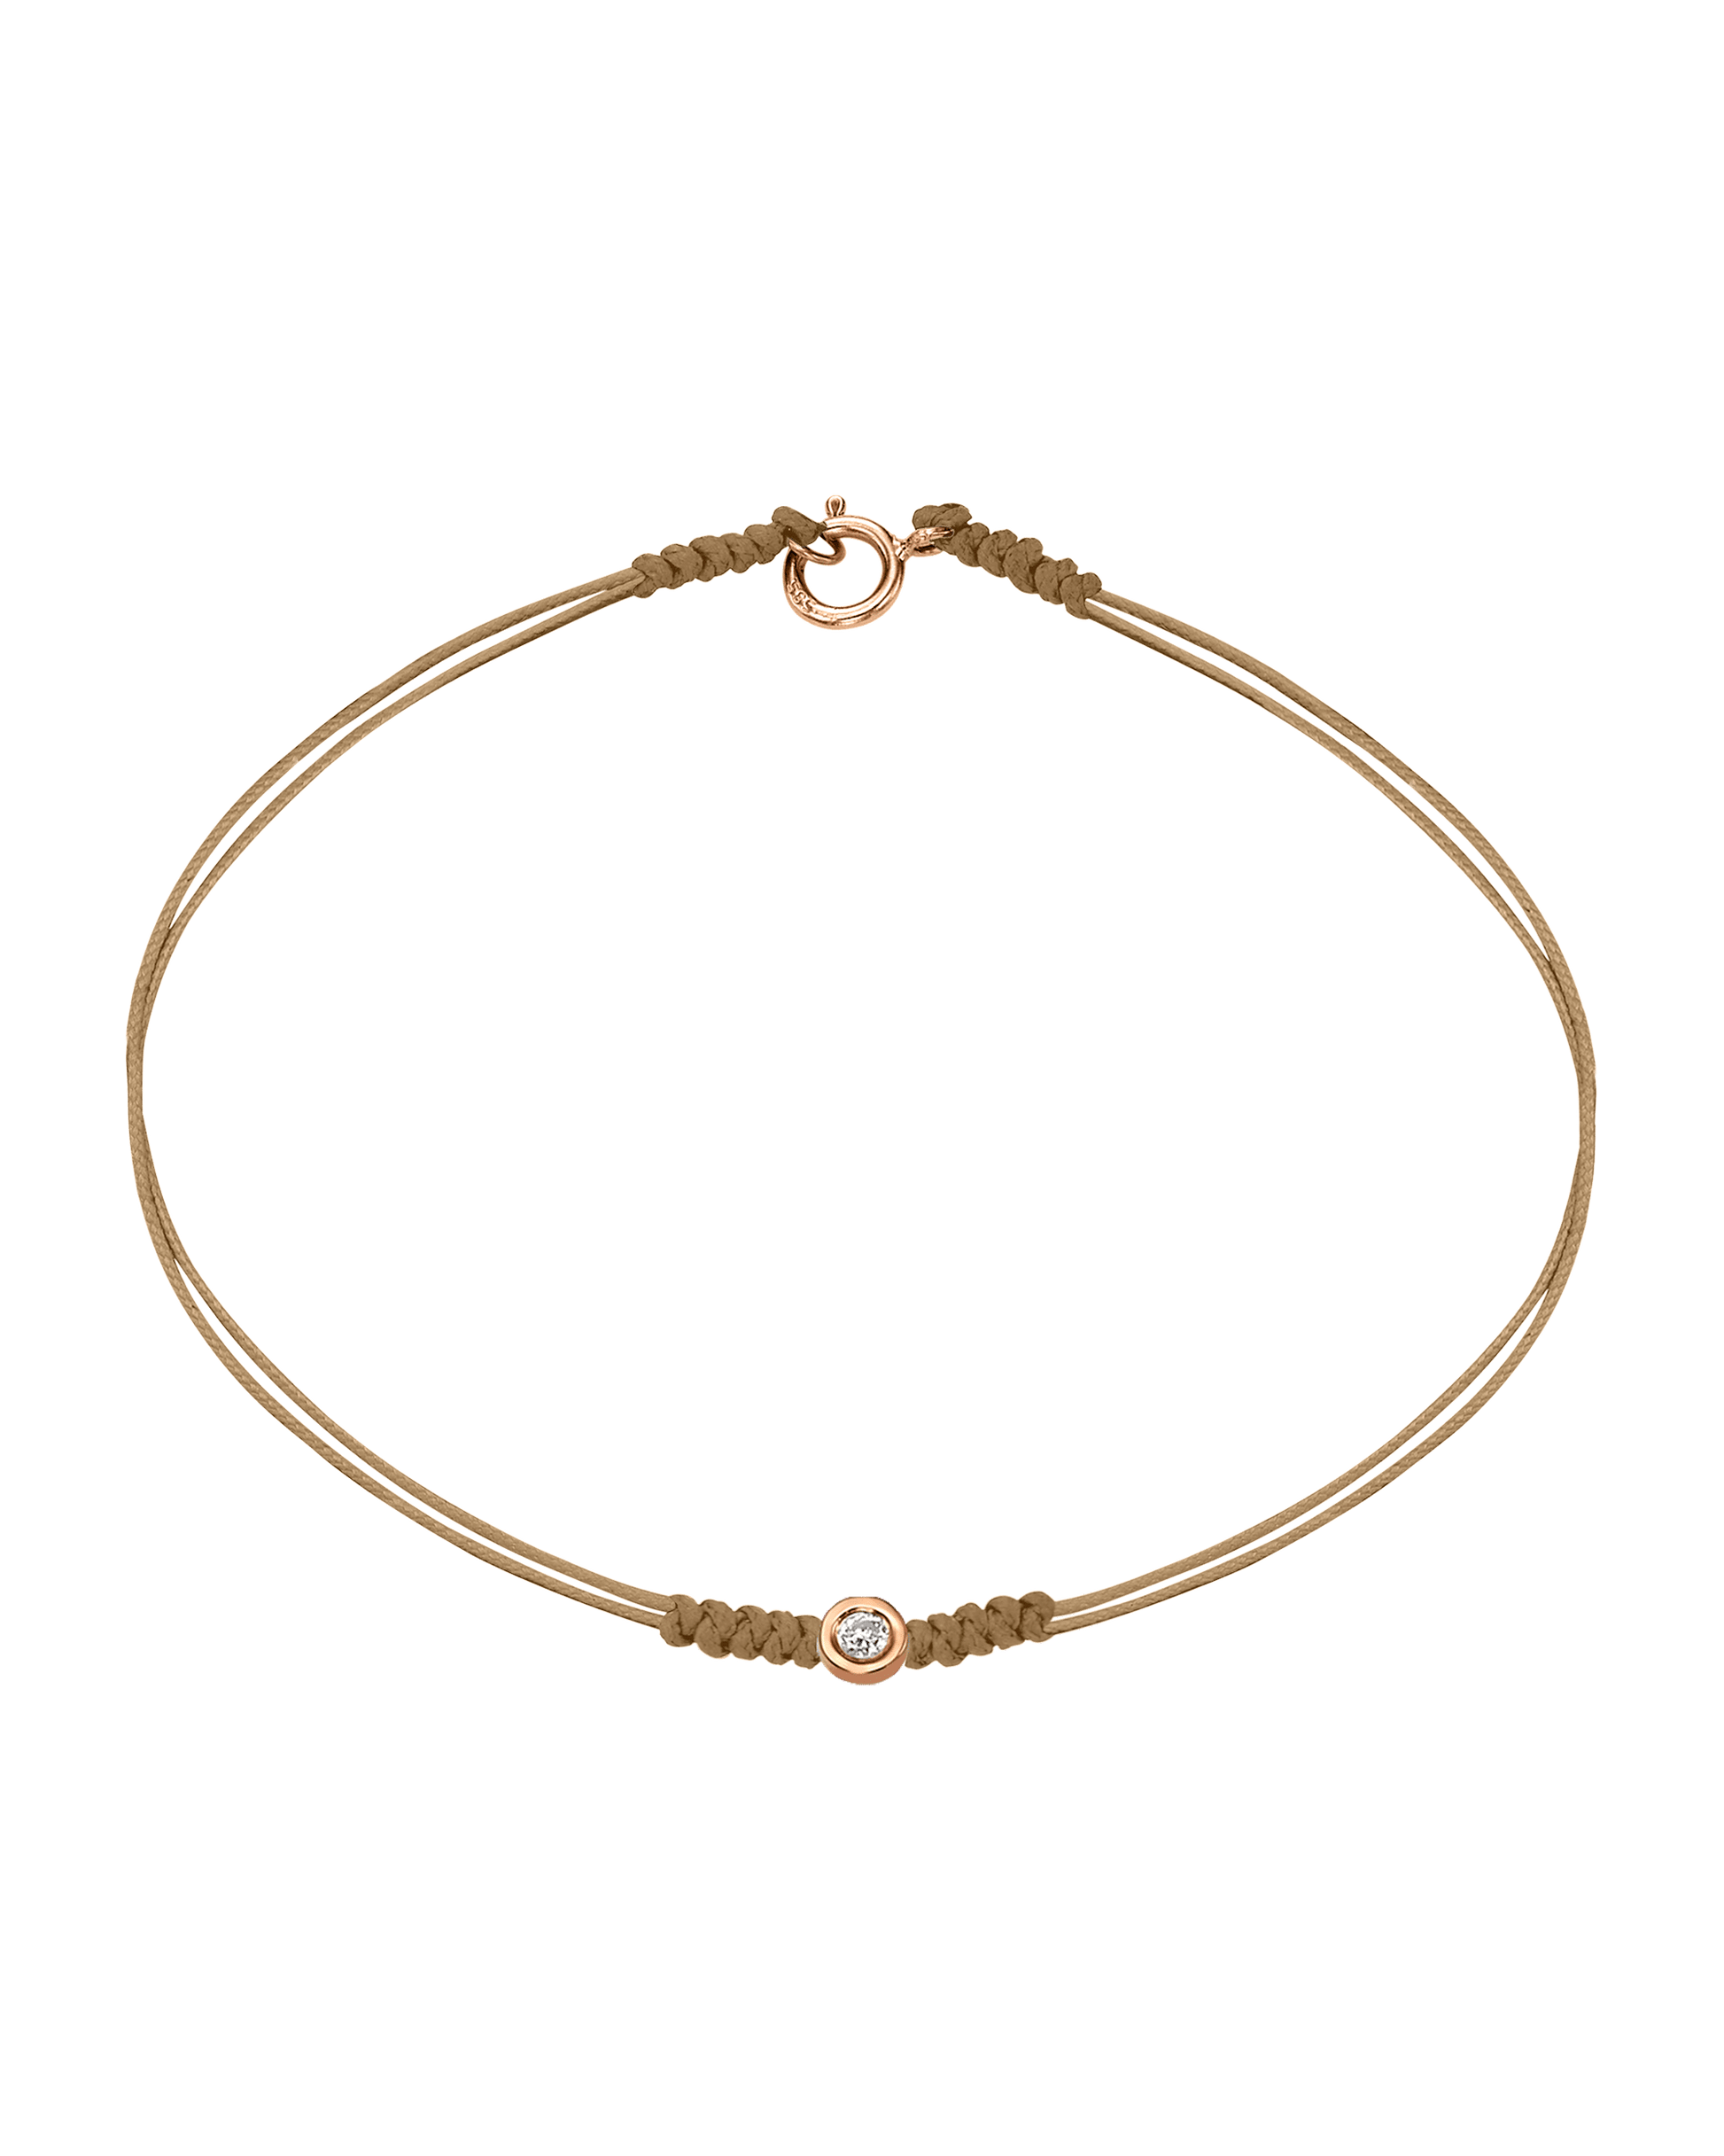 The Classic String of Love with clasp - 14K Rose Gold Bracelets 14K Solid Gold Camel Small: 0.03ct Small - 6 Inches (15.5cm)